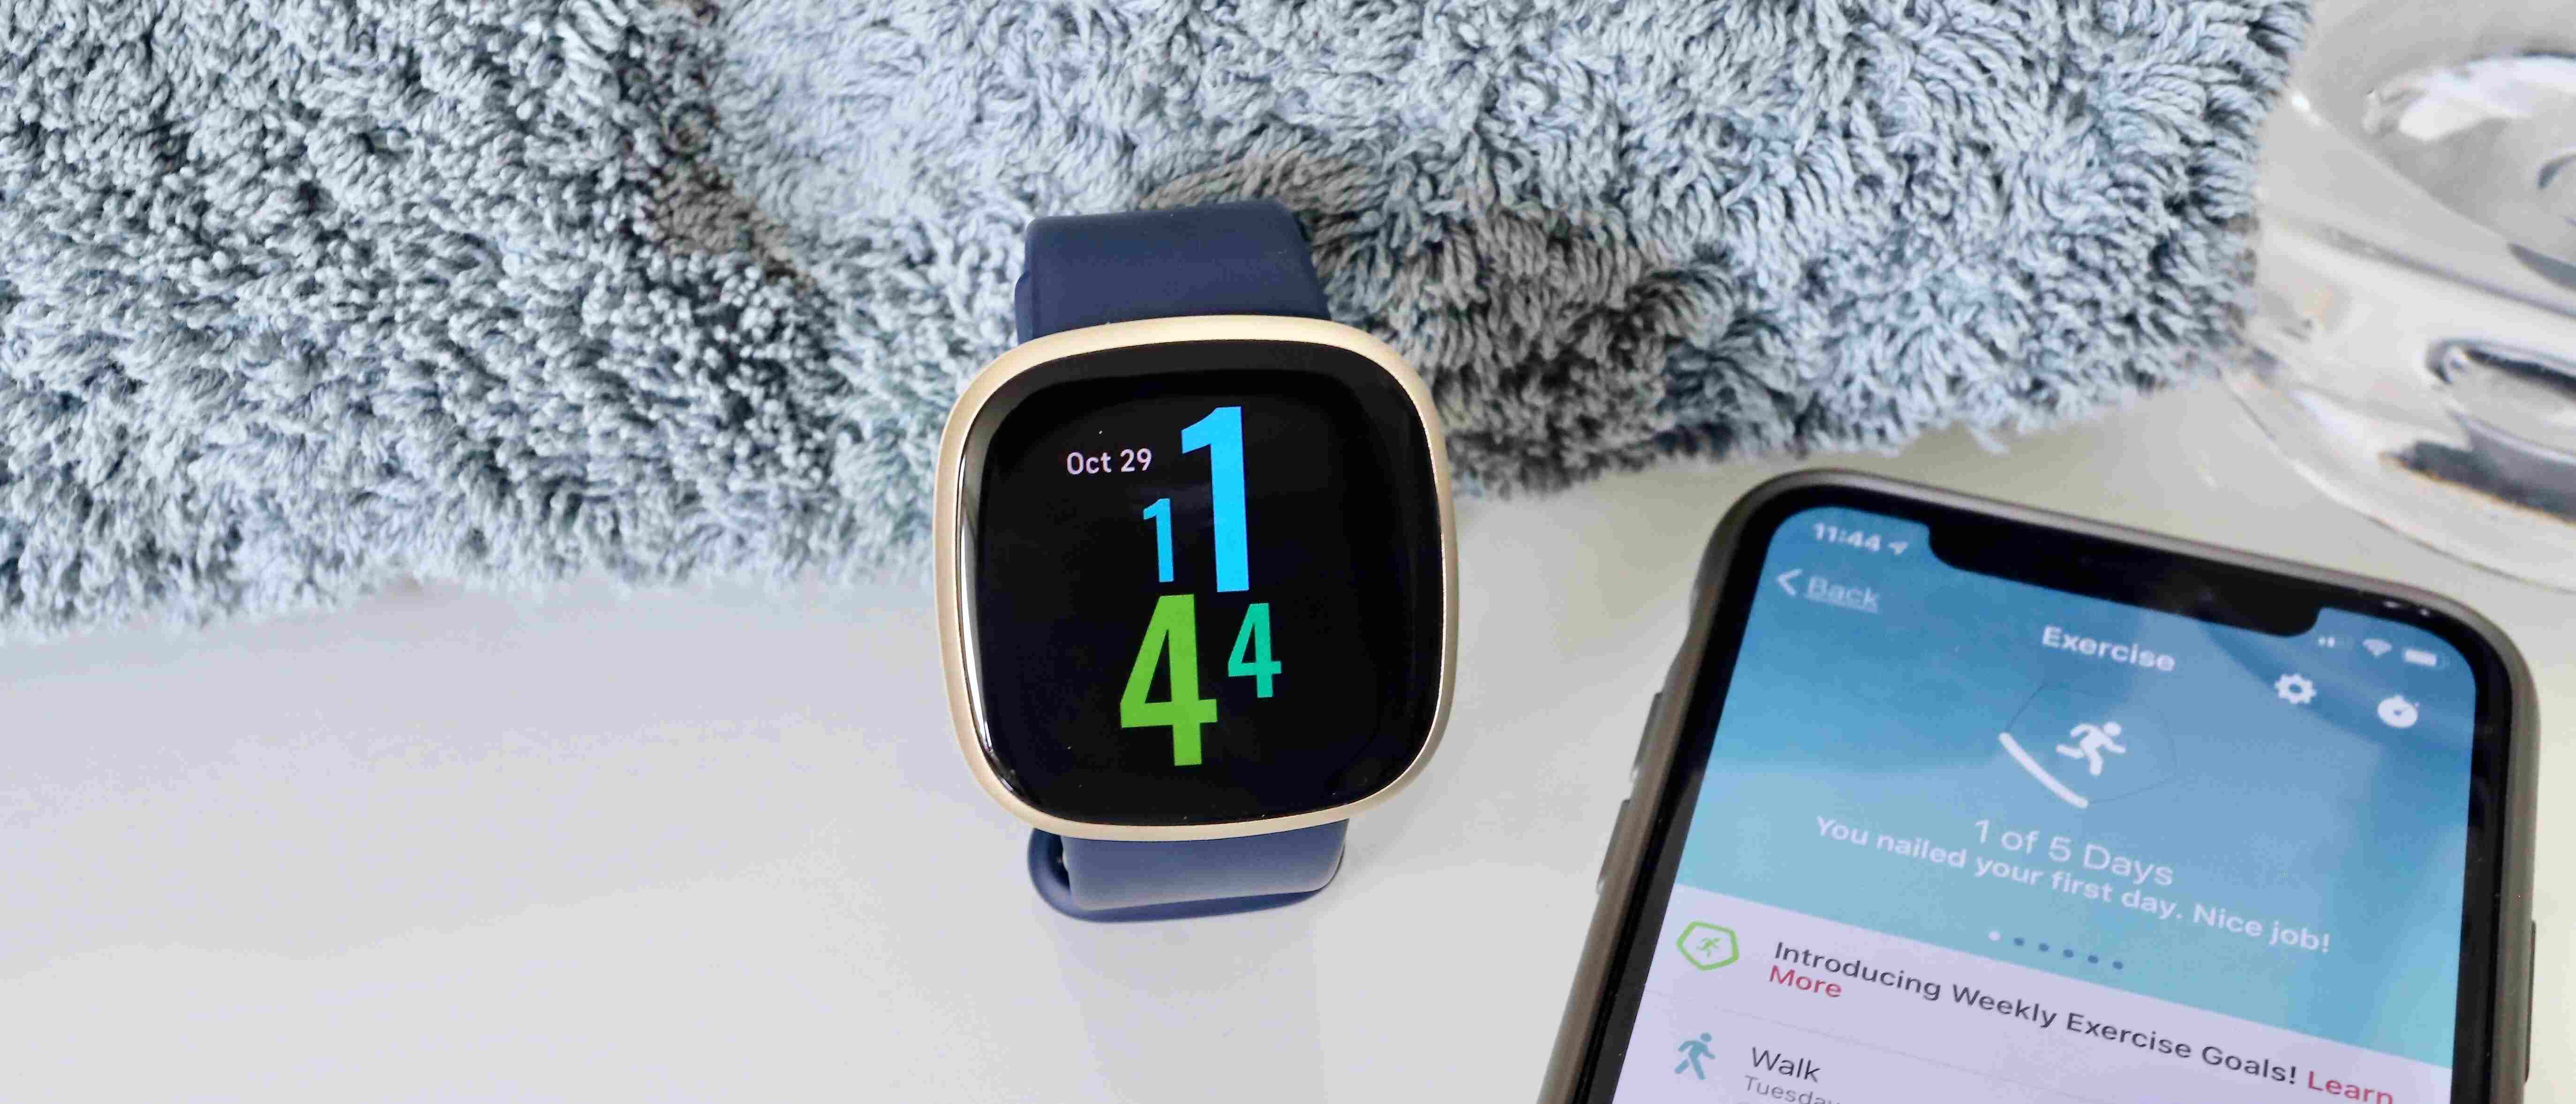 How To Unlock Your Android Phone With Your Fitbit